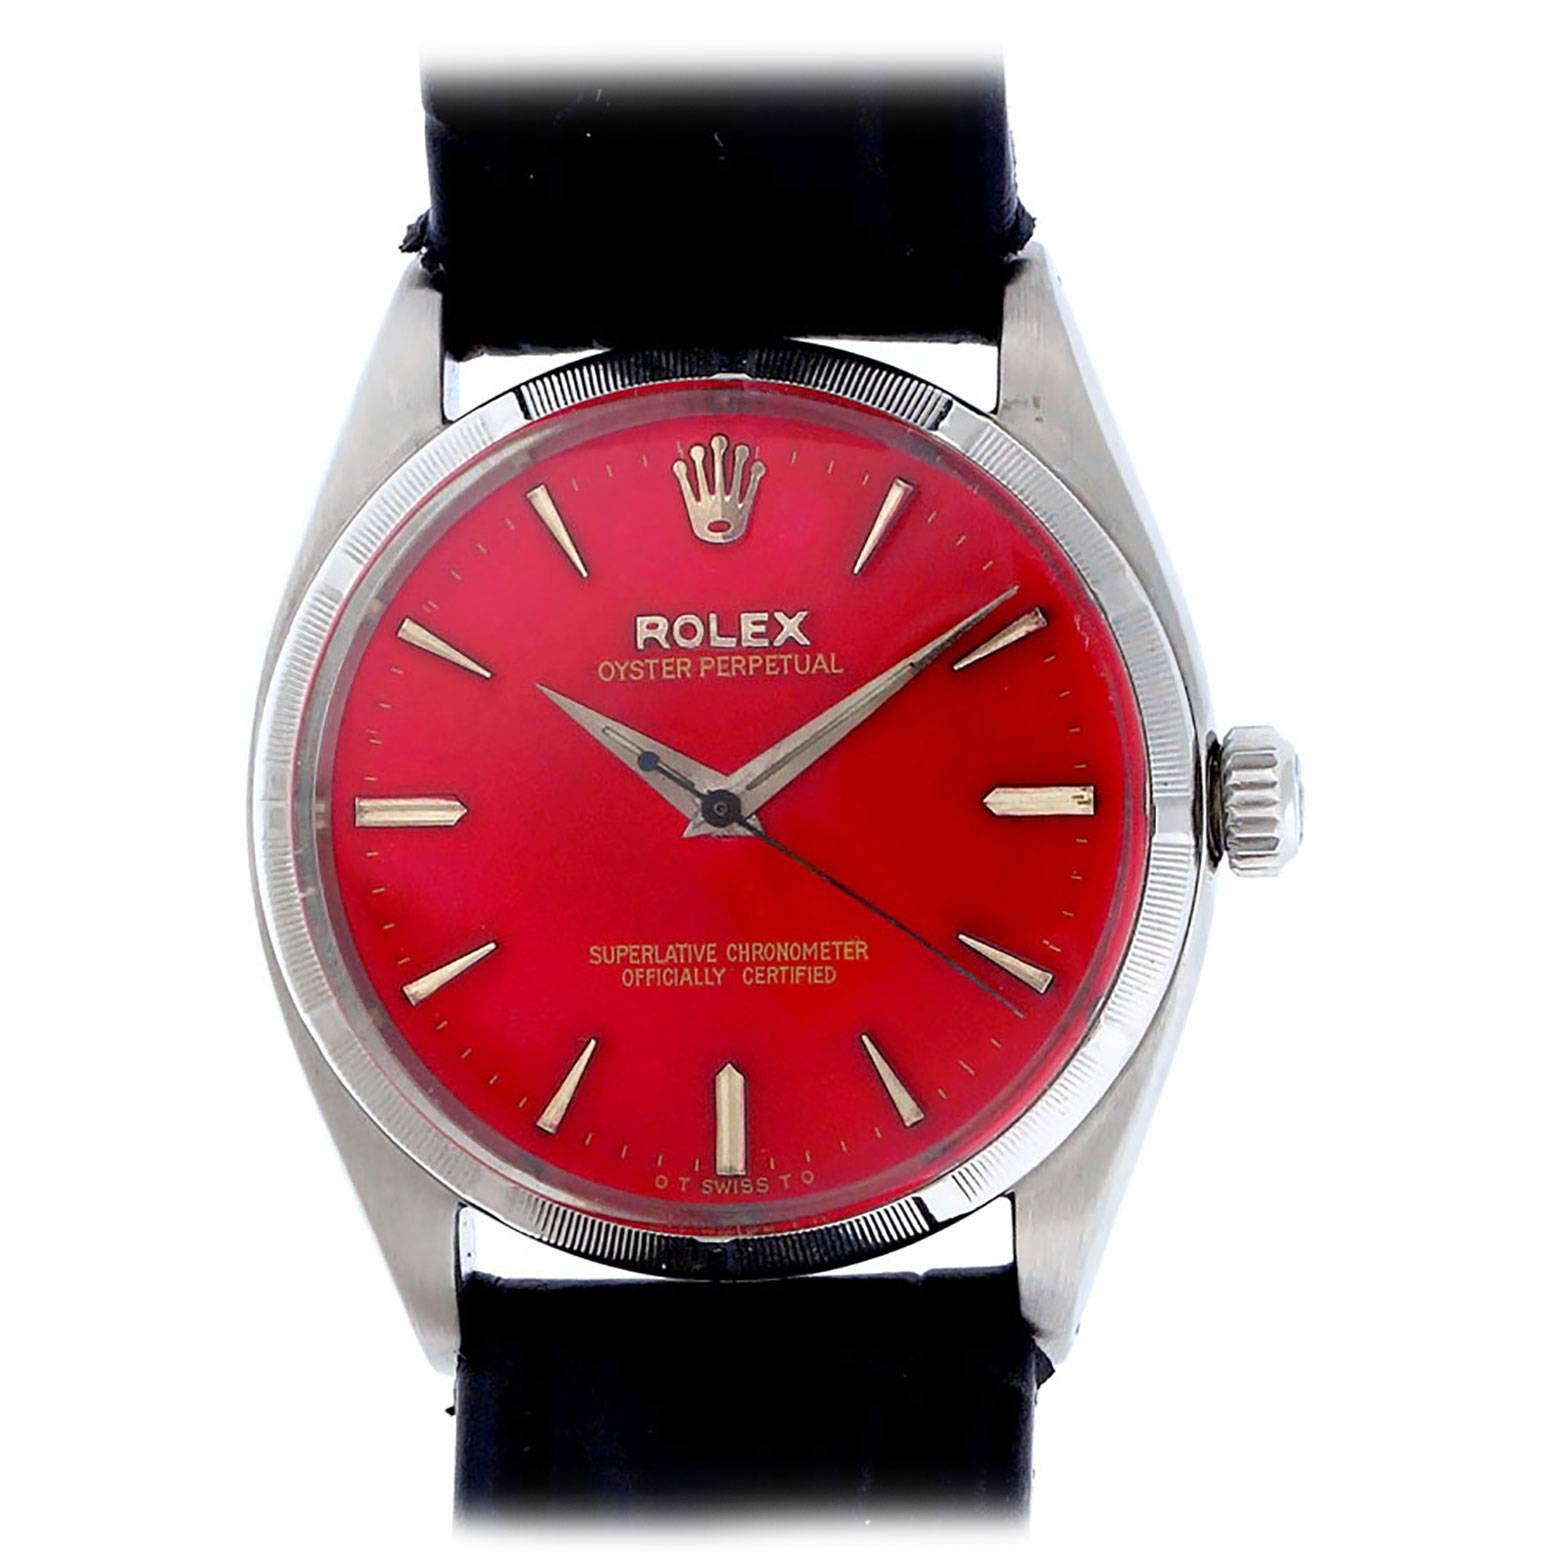 Rolex Stainless Steel Custom Colored Red Dial Wristwatch Ref 6565